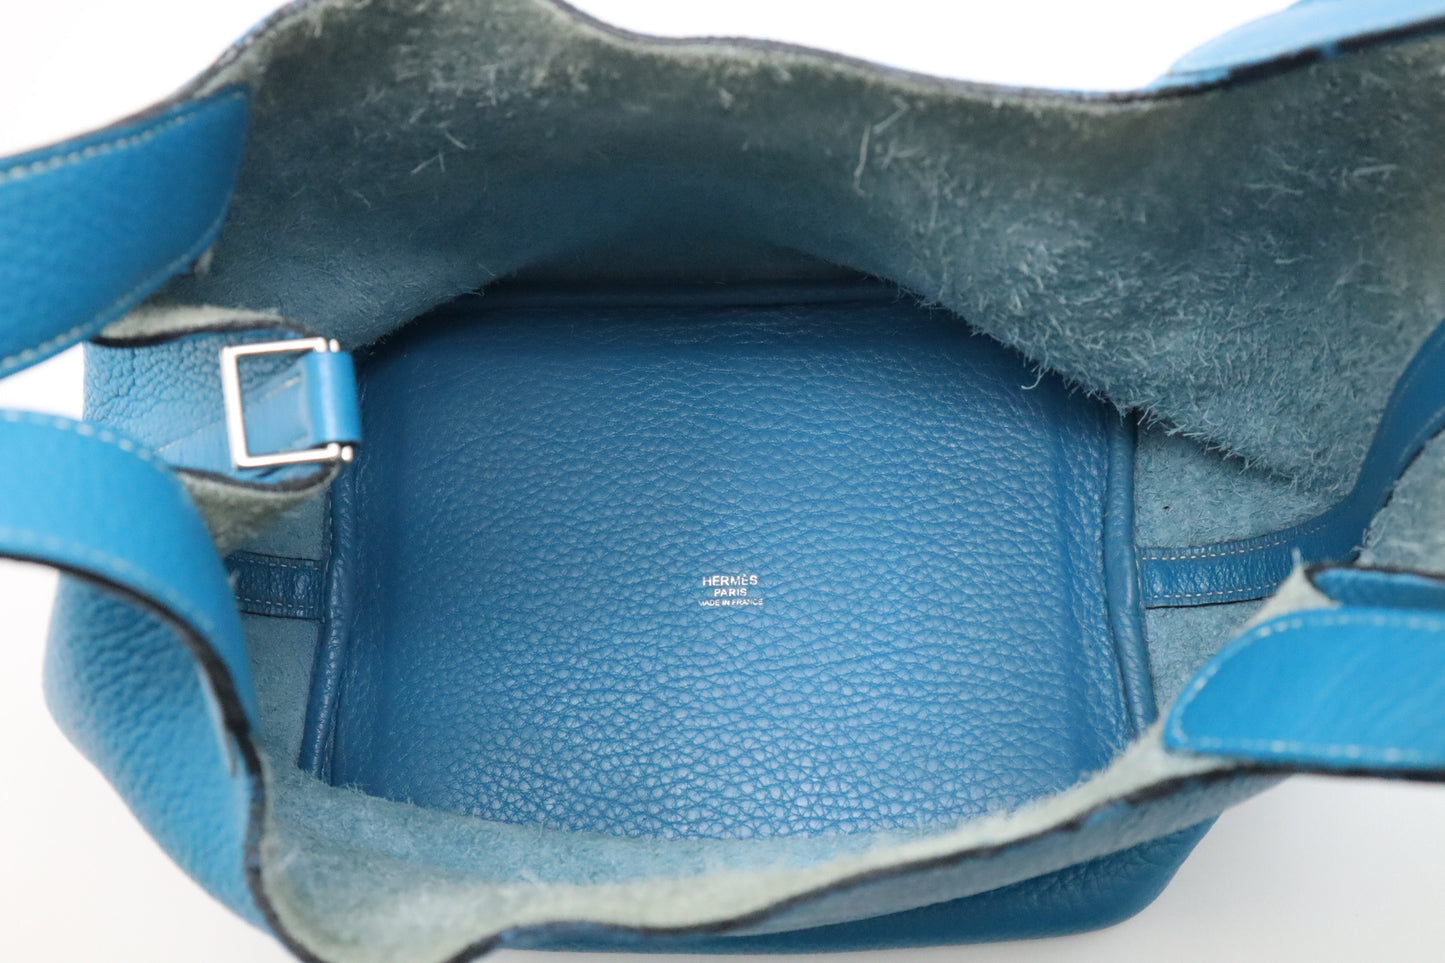 Hermes Picotin 22 in Blue Clemence Leather